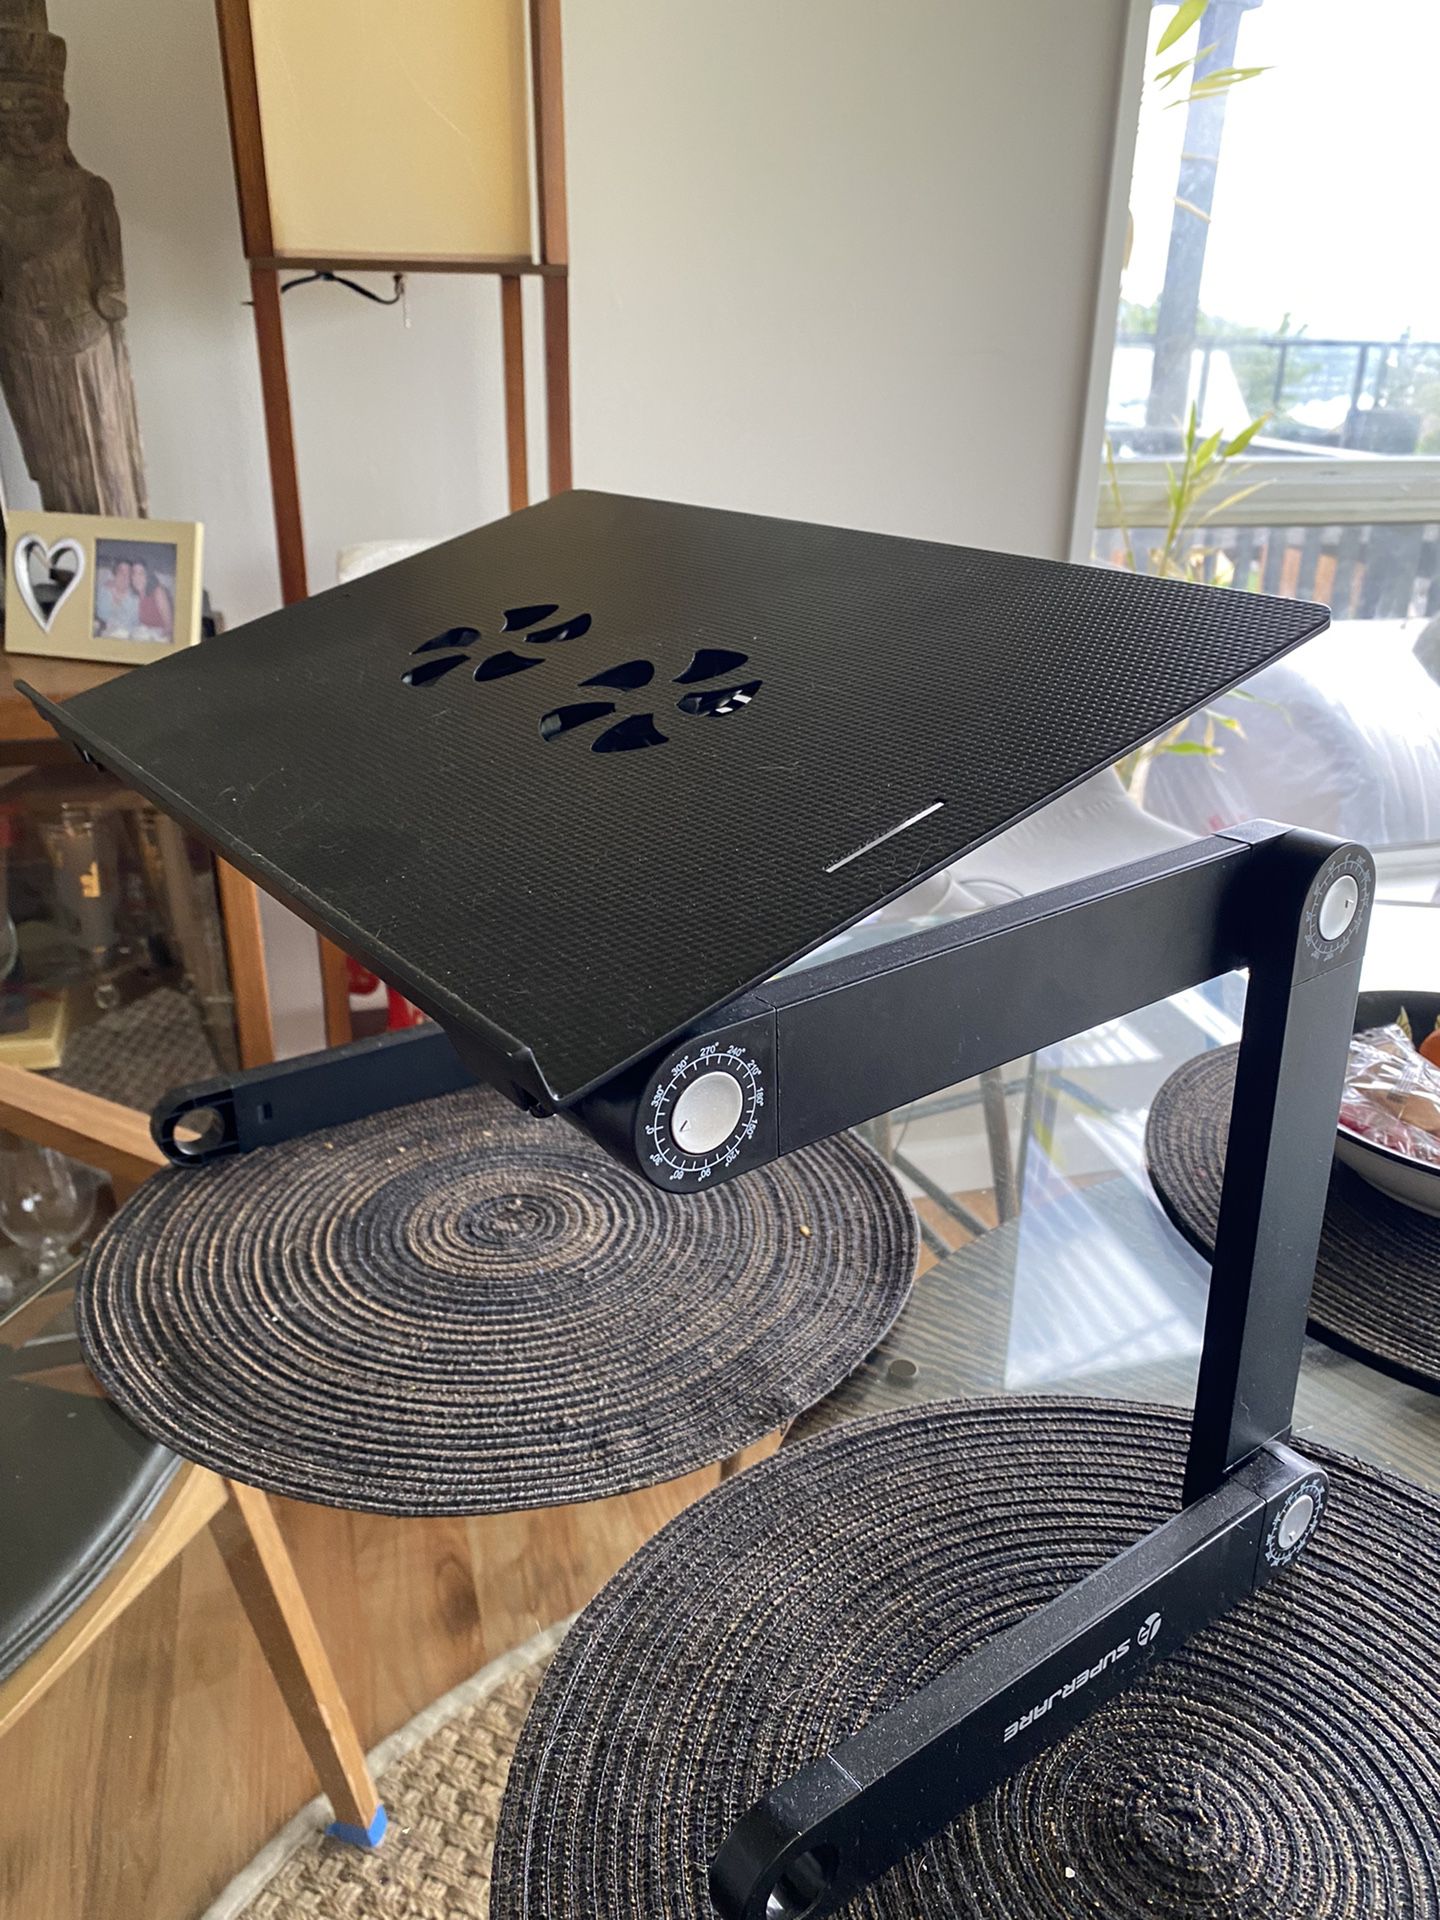 Adjustable Laptop Stand For Desk With Fan